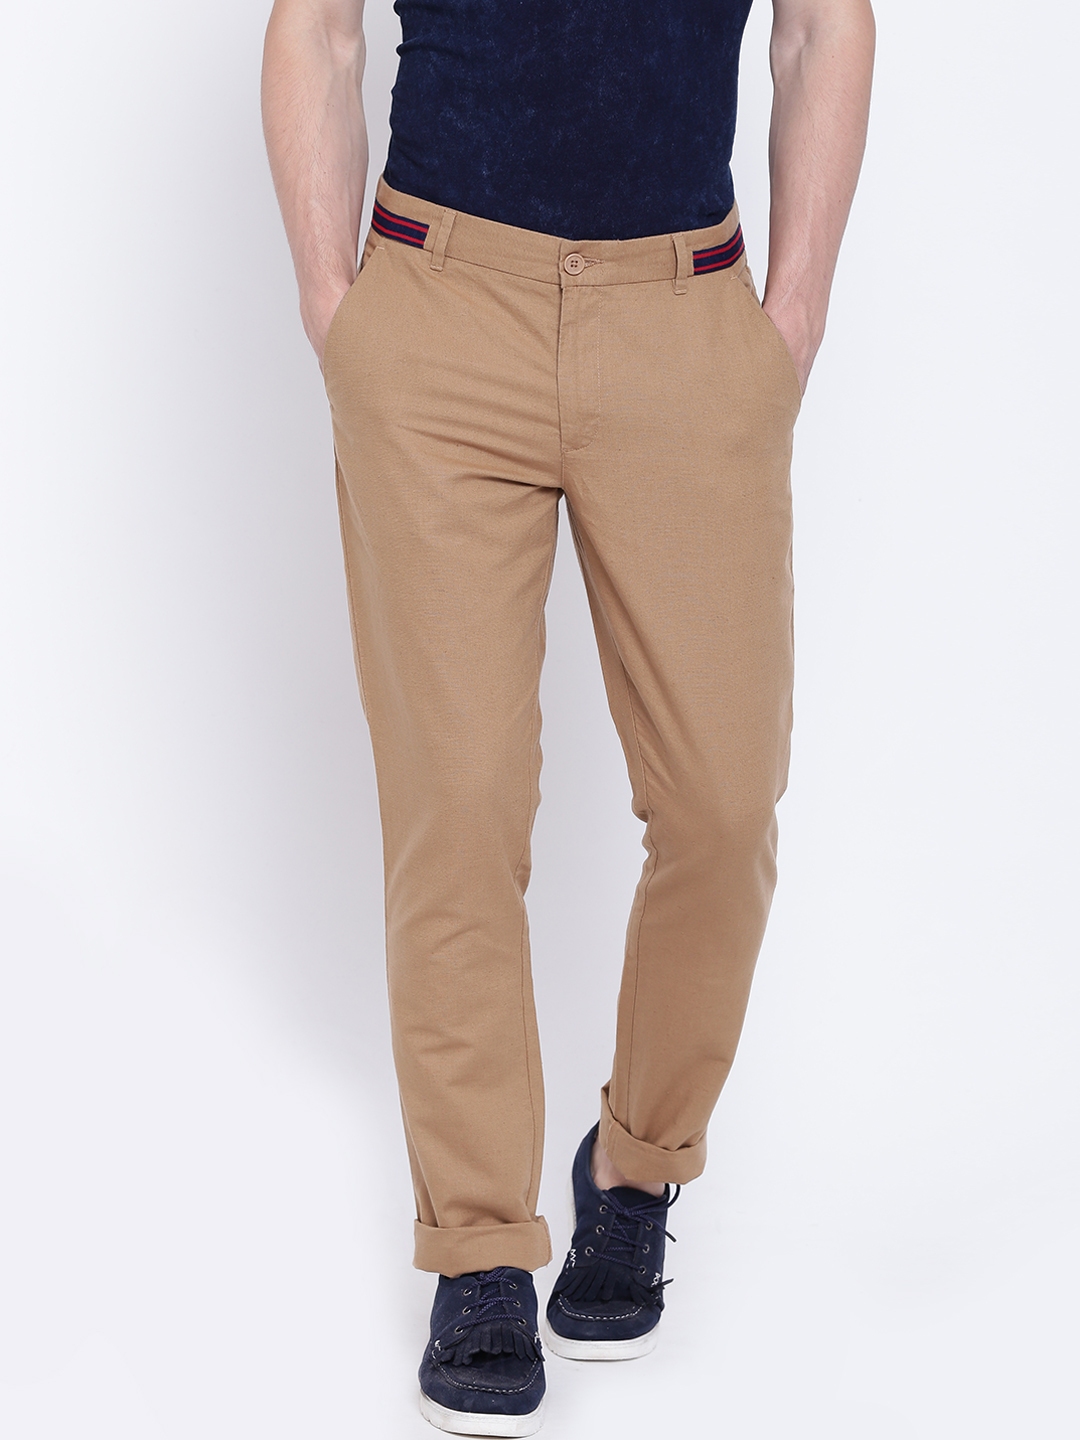 Buy United Colors Of Benetton Men Brown Linen Slim Fit Casual Trousers   Trousers for Men 722670  Myntra